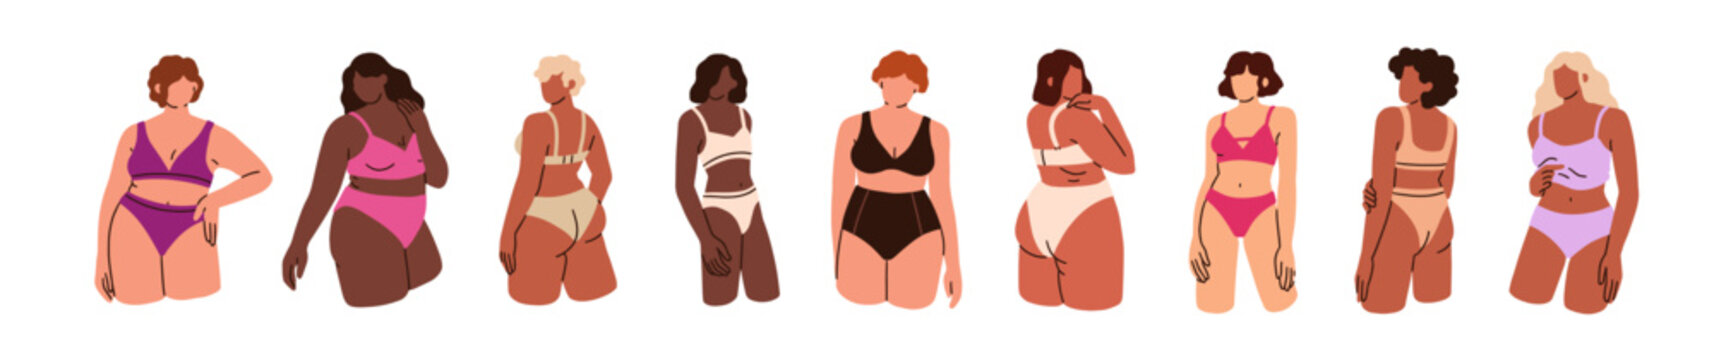 Woman in lingerie set. Diverse women with different body type, fat and slim figures. Bodypositive females in underwear, bikini, bra and panties. Flat vector illustrations isolated on white background